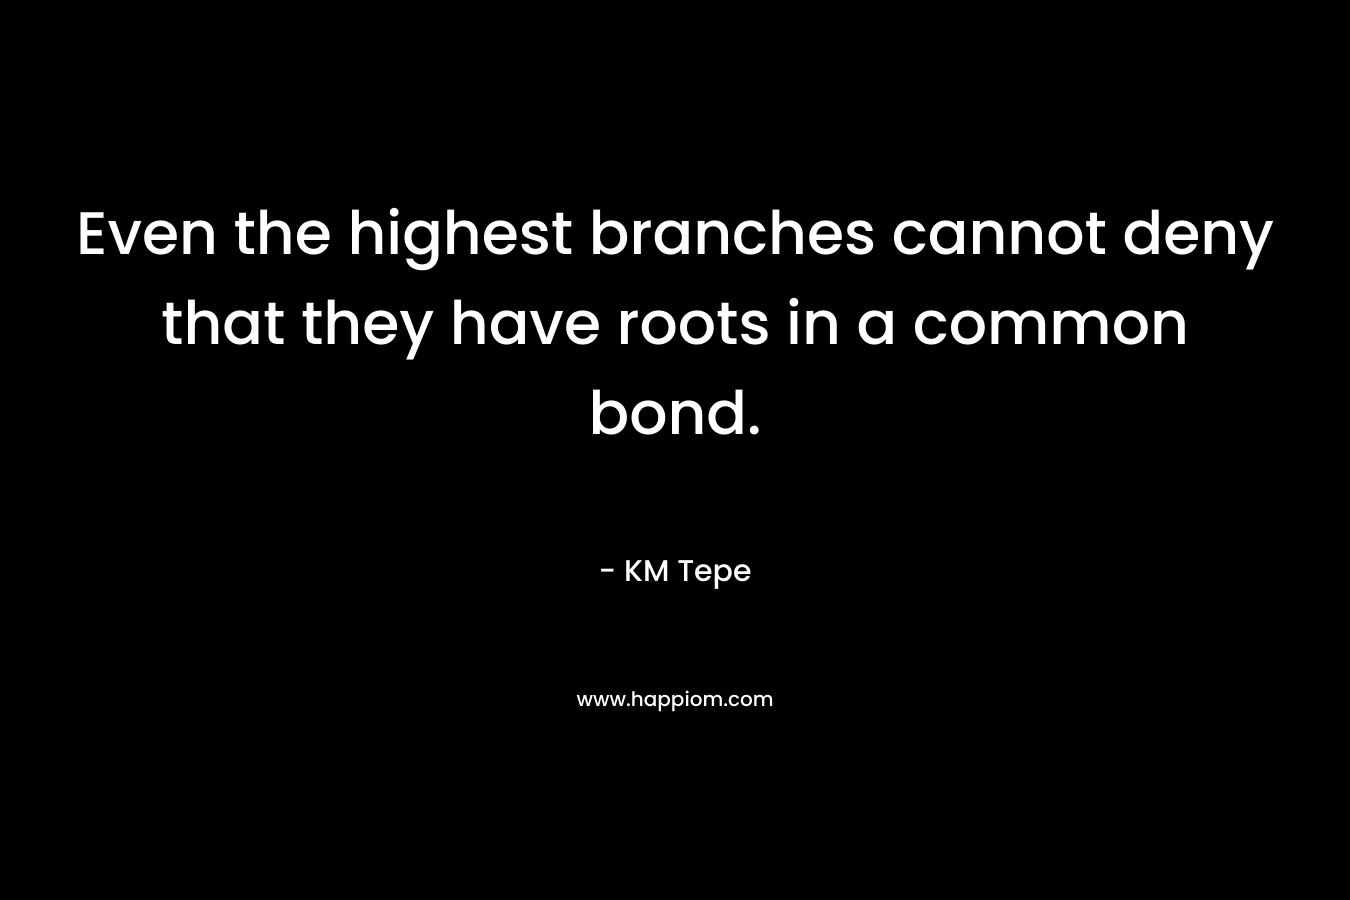 Even the highest branches cannot deny that they have roots in a common bond. – KM Tepe